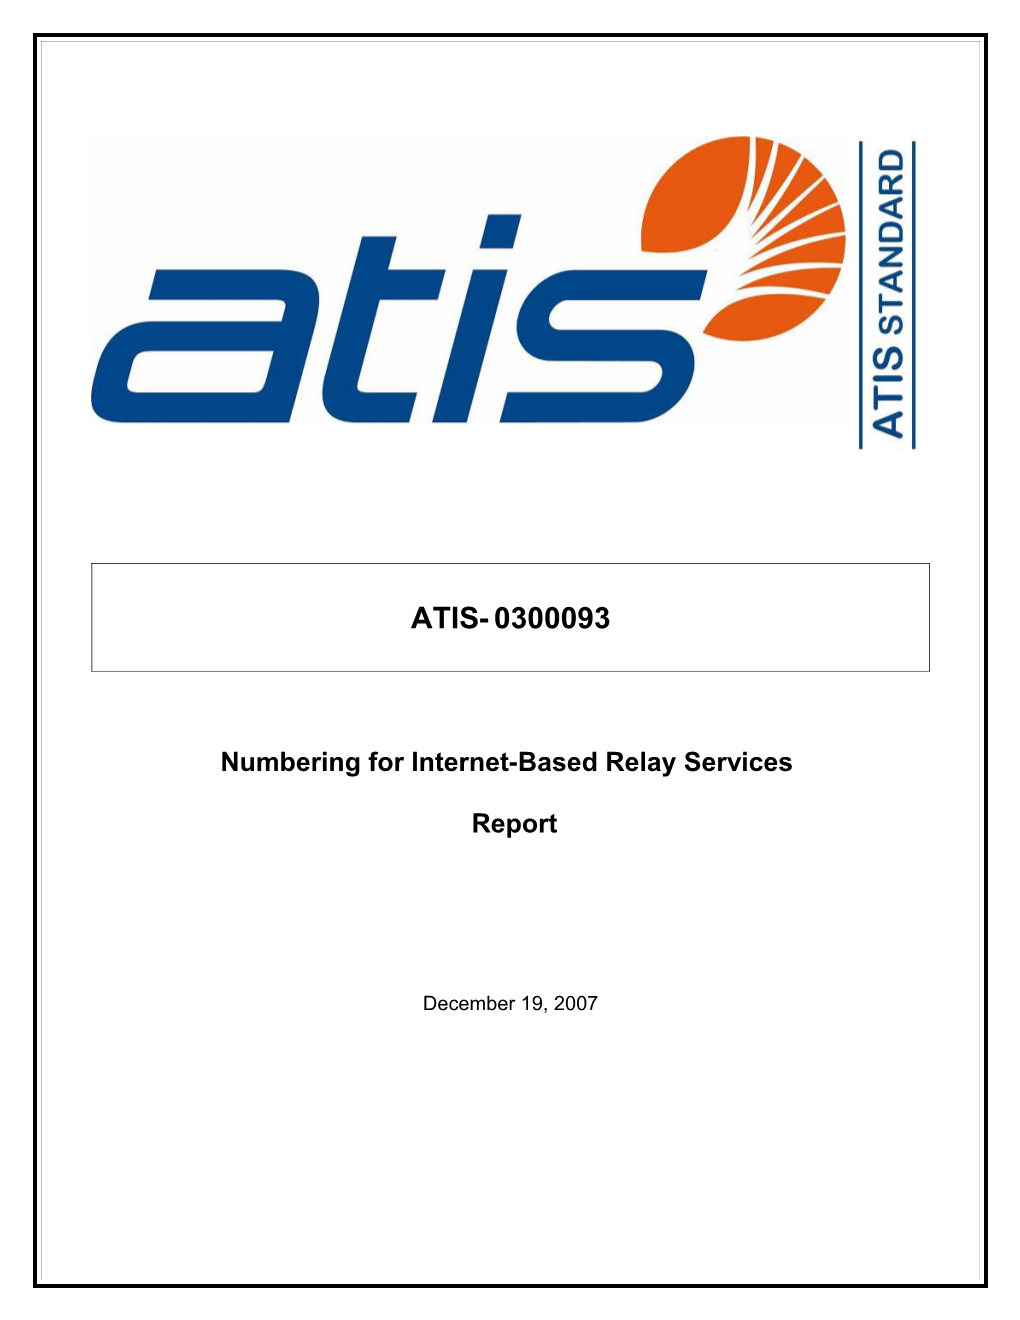 Numbering for Internet-Based Relay Services